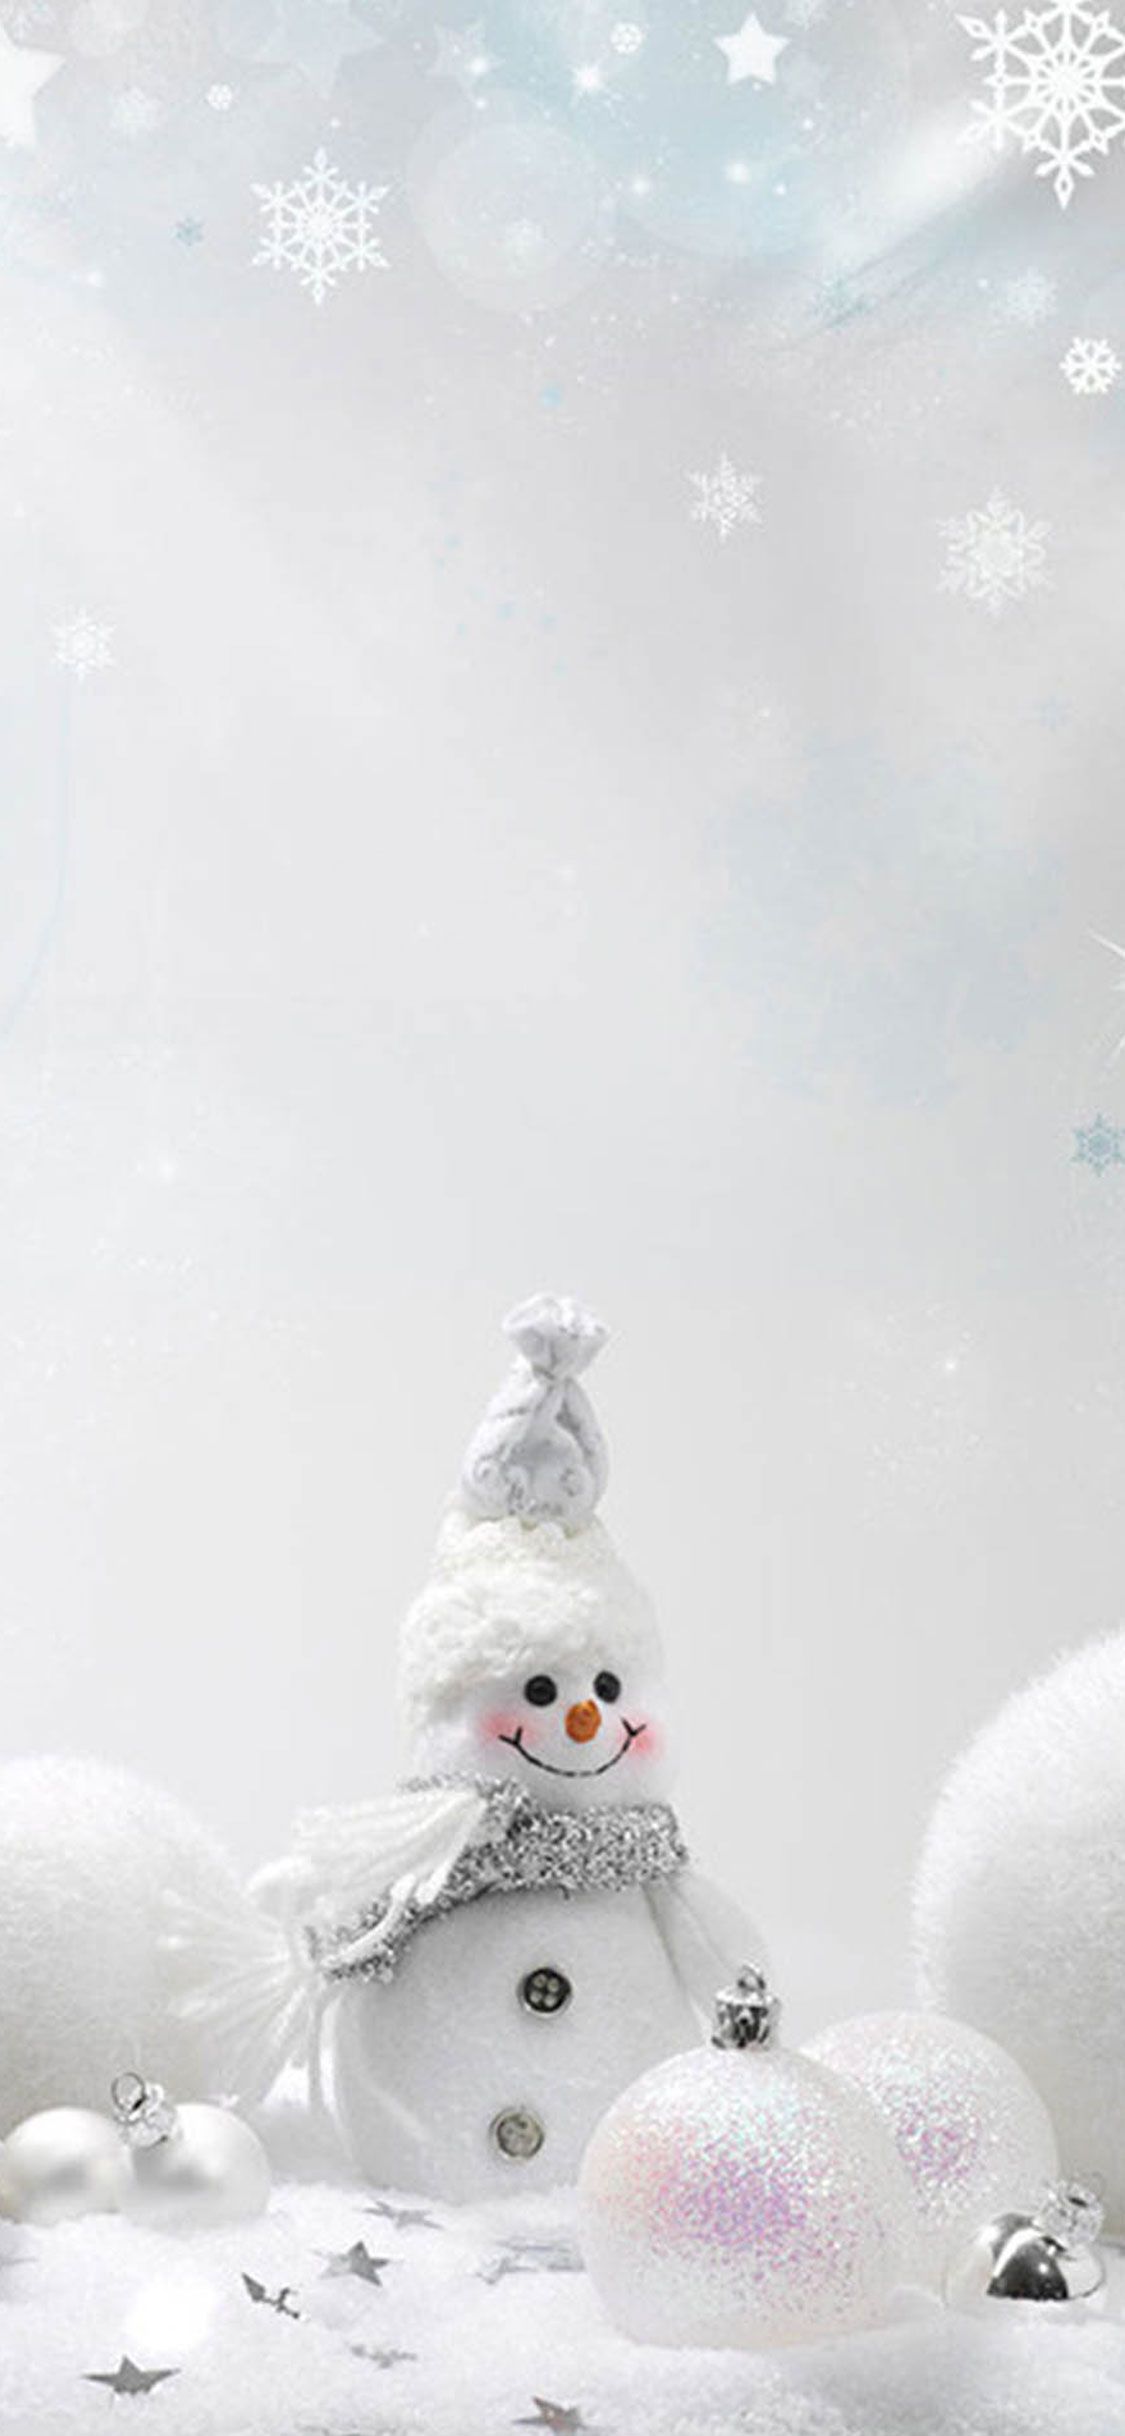 Snow Christmas iPhone Wallpaper Free Snow Christmas iPhone Background